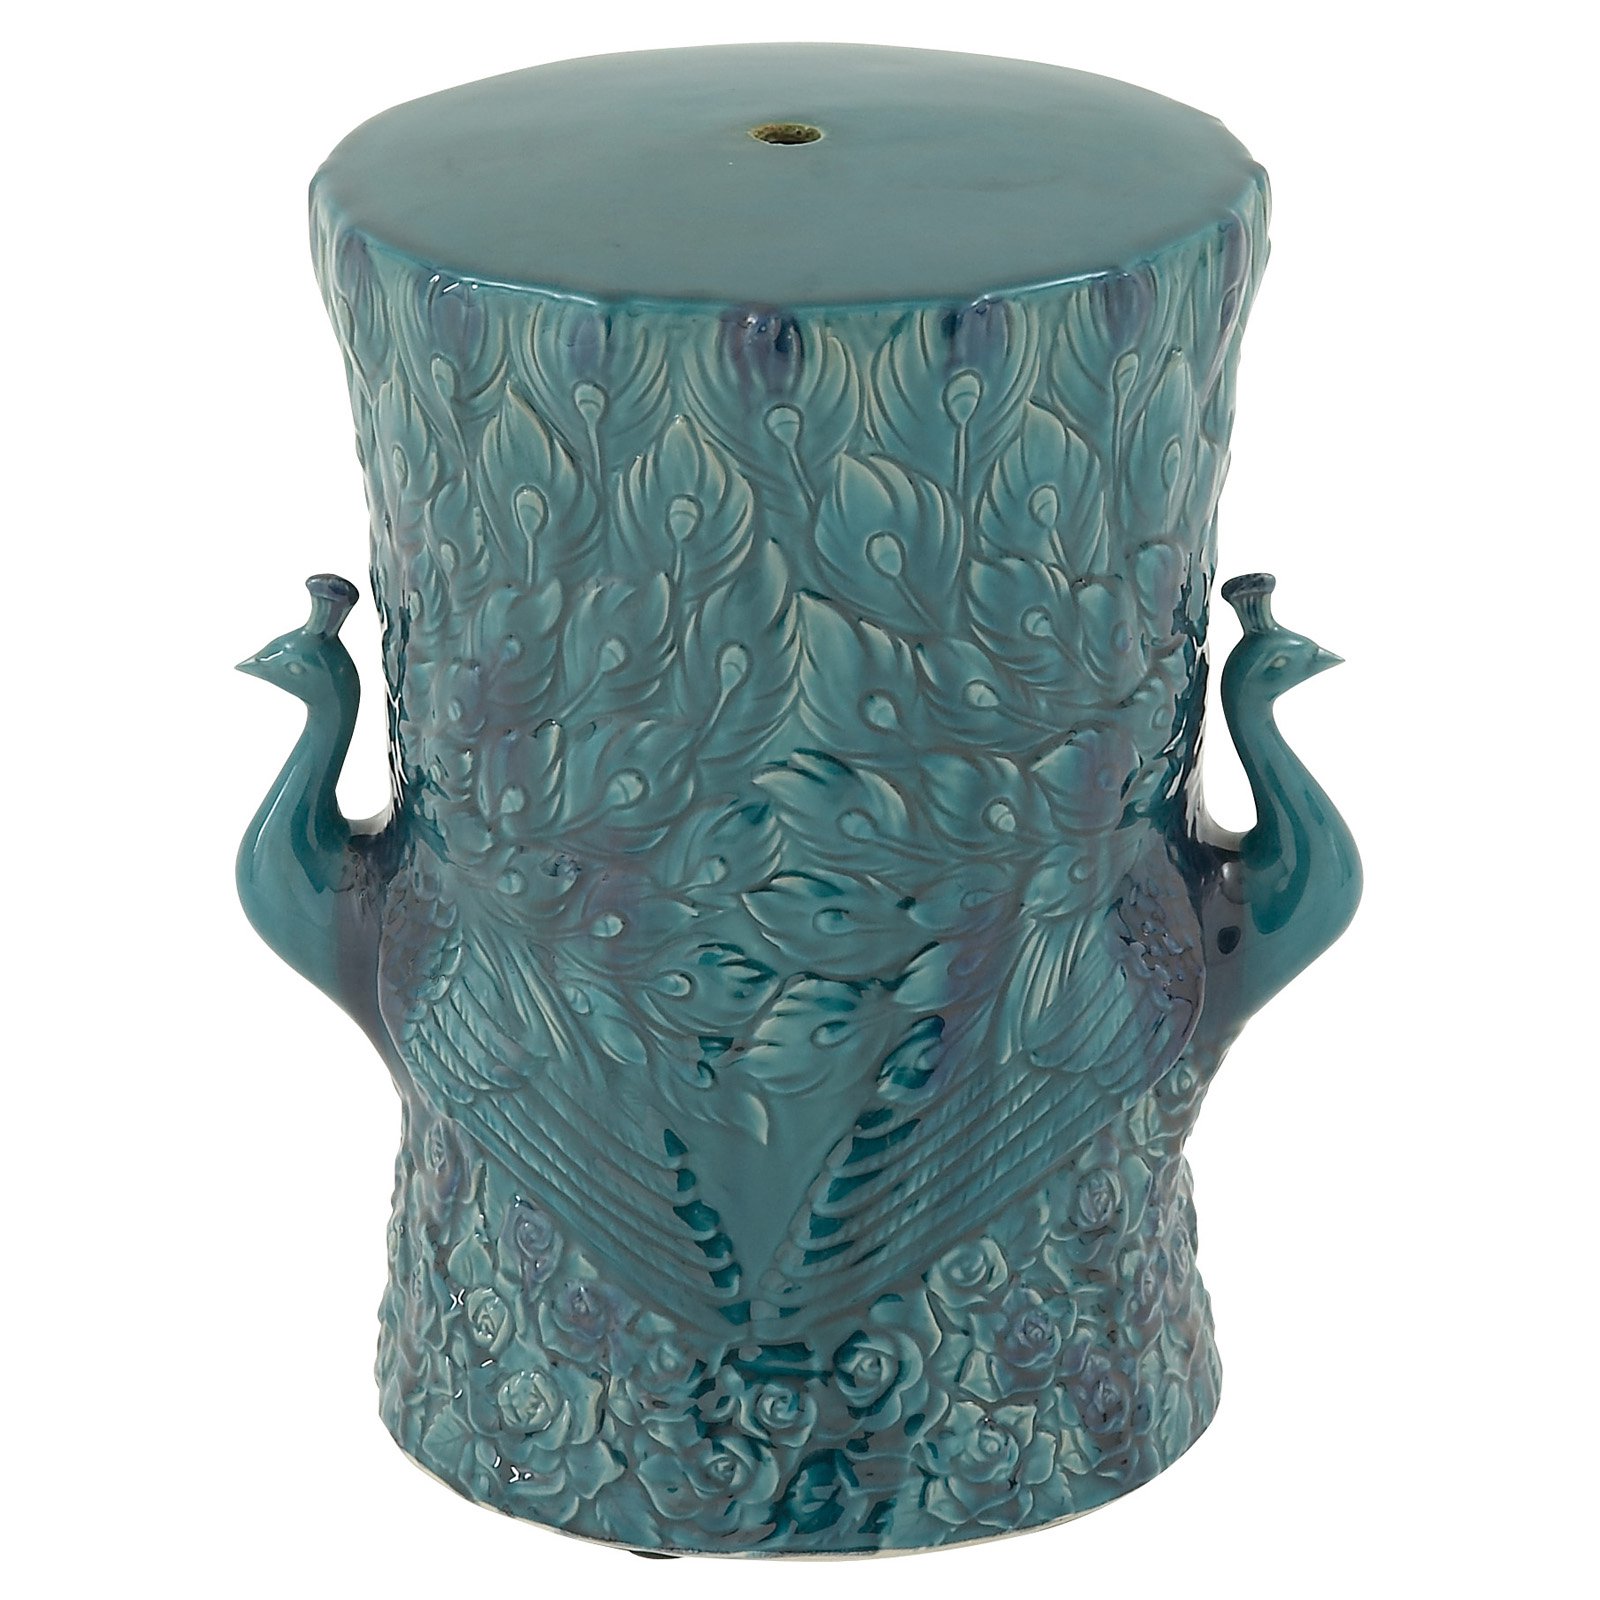 benzara attractive ceramic accent table end tables ashley zara teal accessories plastic ice bucket gold mirrored coffee small square french round side sweet alcoholic drinks tall